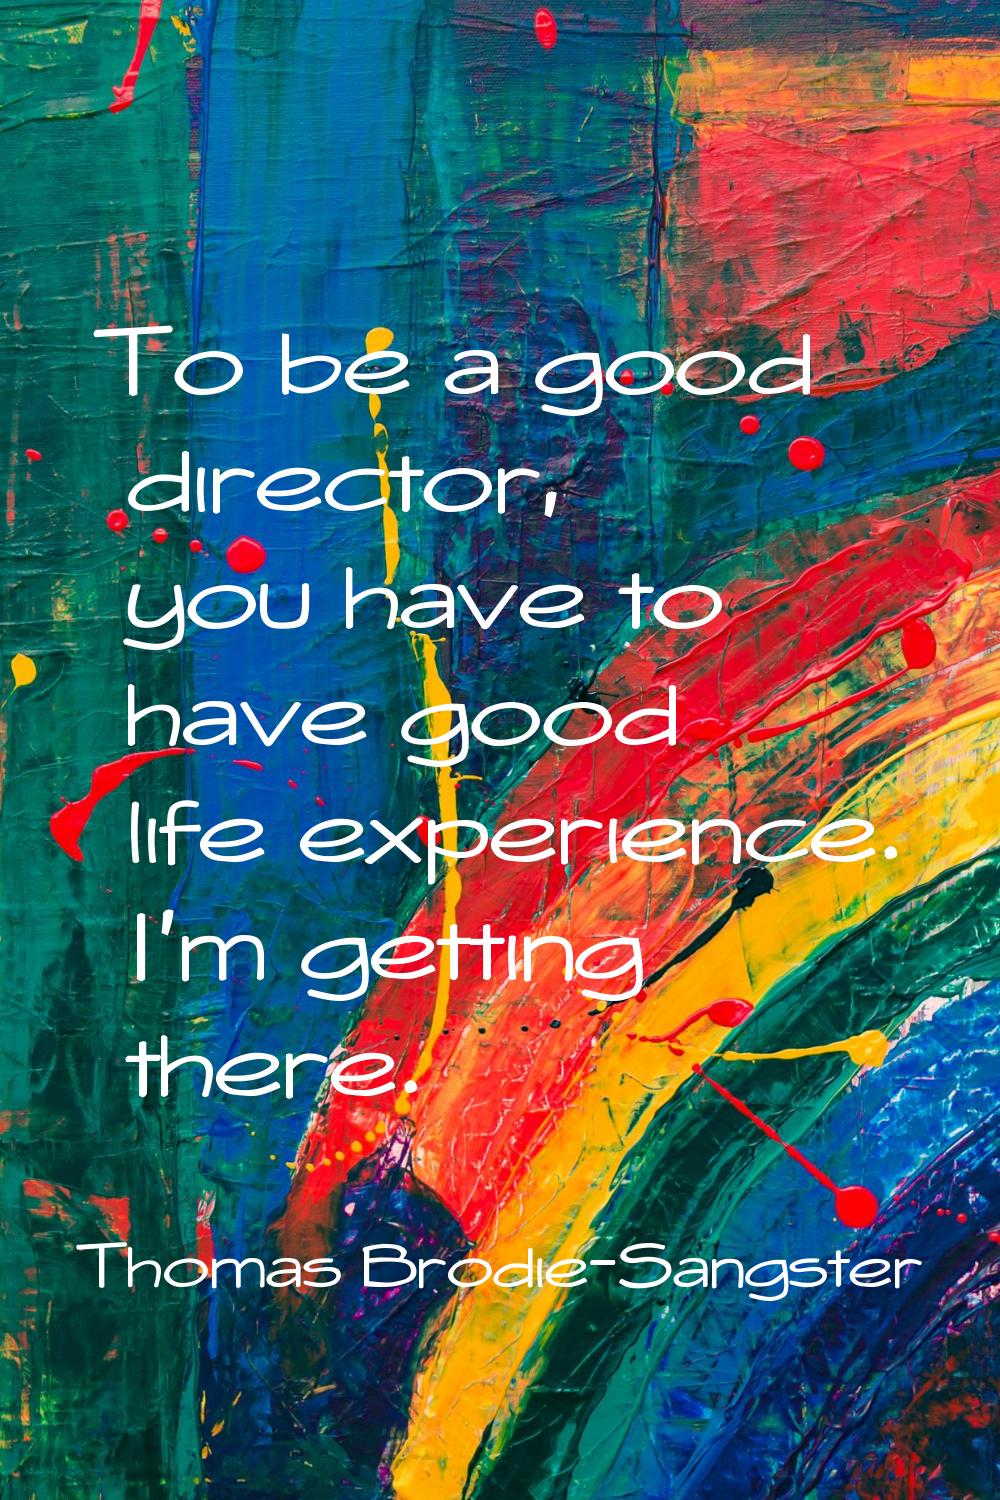 To be a good director, you have to have good life experience. I'm getting there.